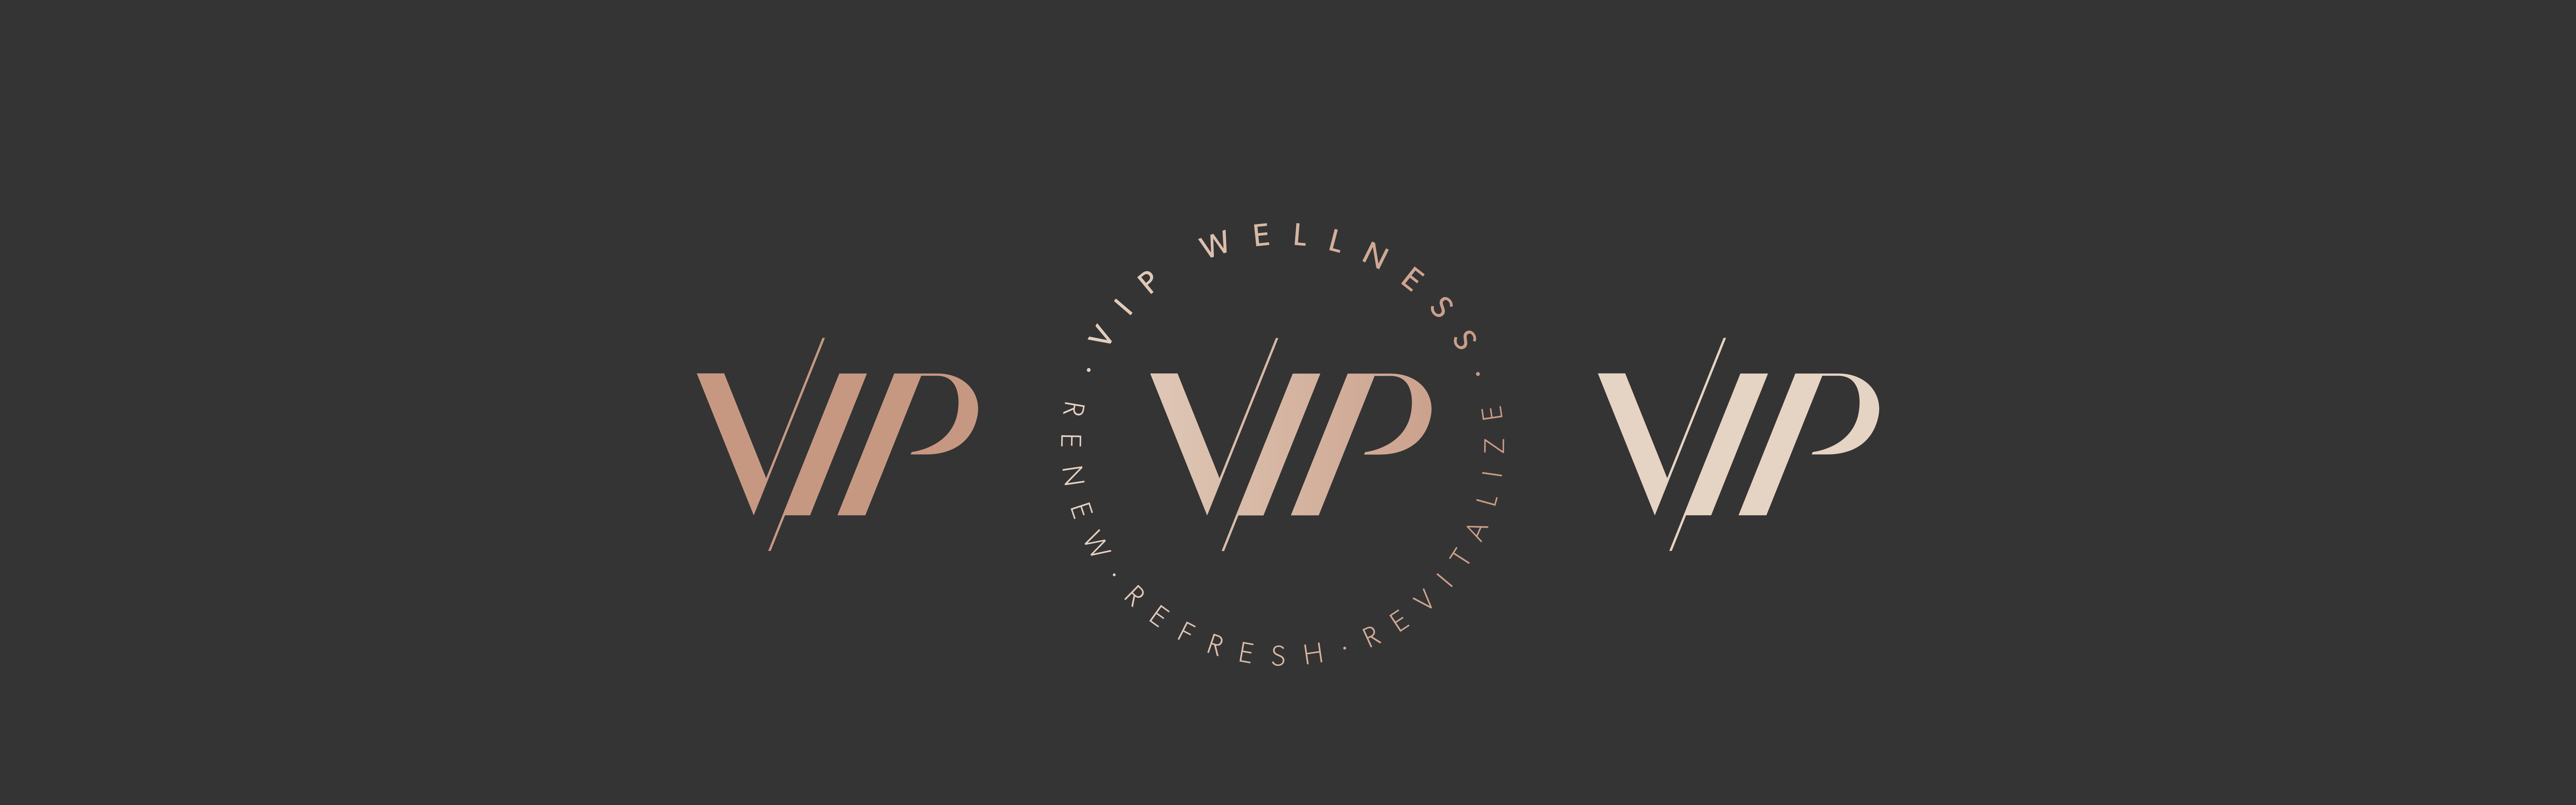 Graphic design featuring the acronym 'VIP Wellness' in a circular arrangement with the words 'refresh,' and 'revitalize' interspersed, set against a dark background.